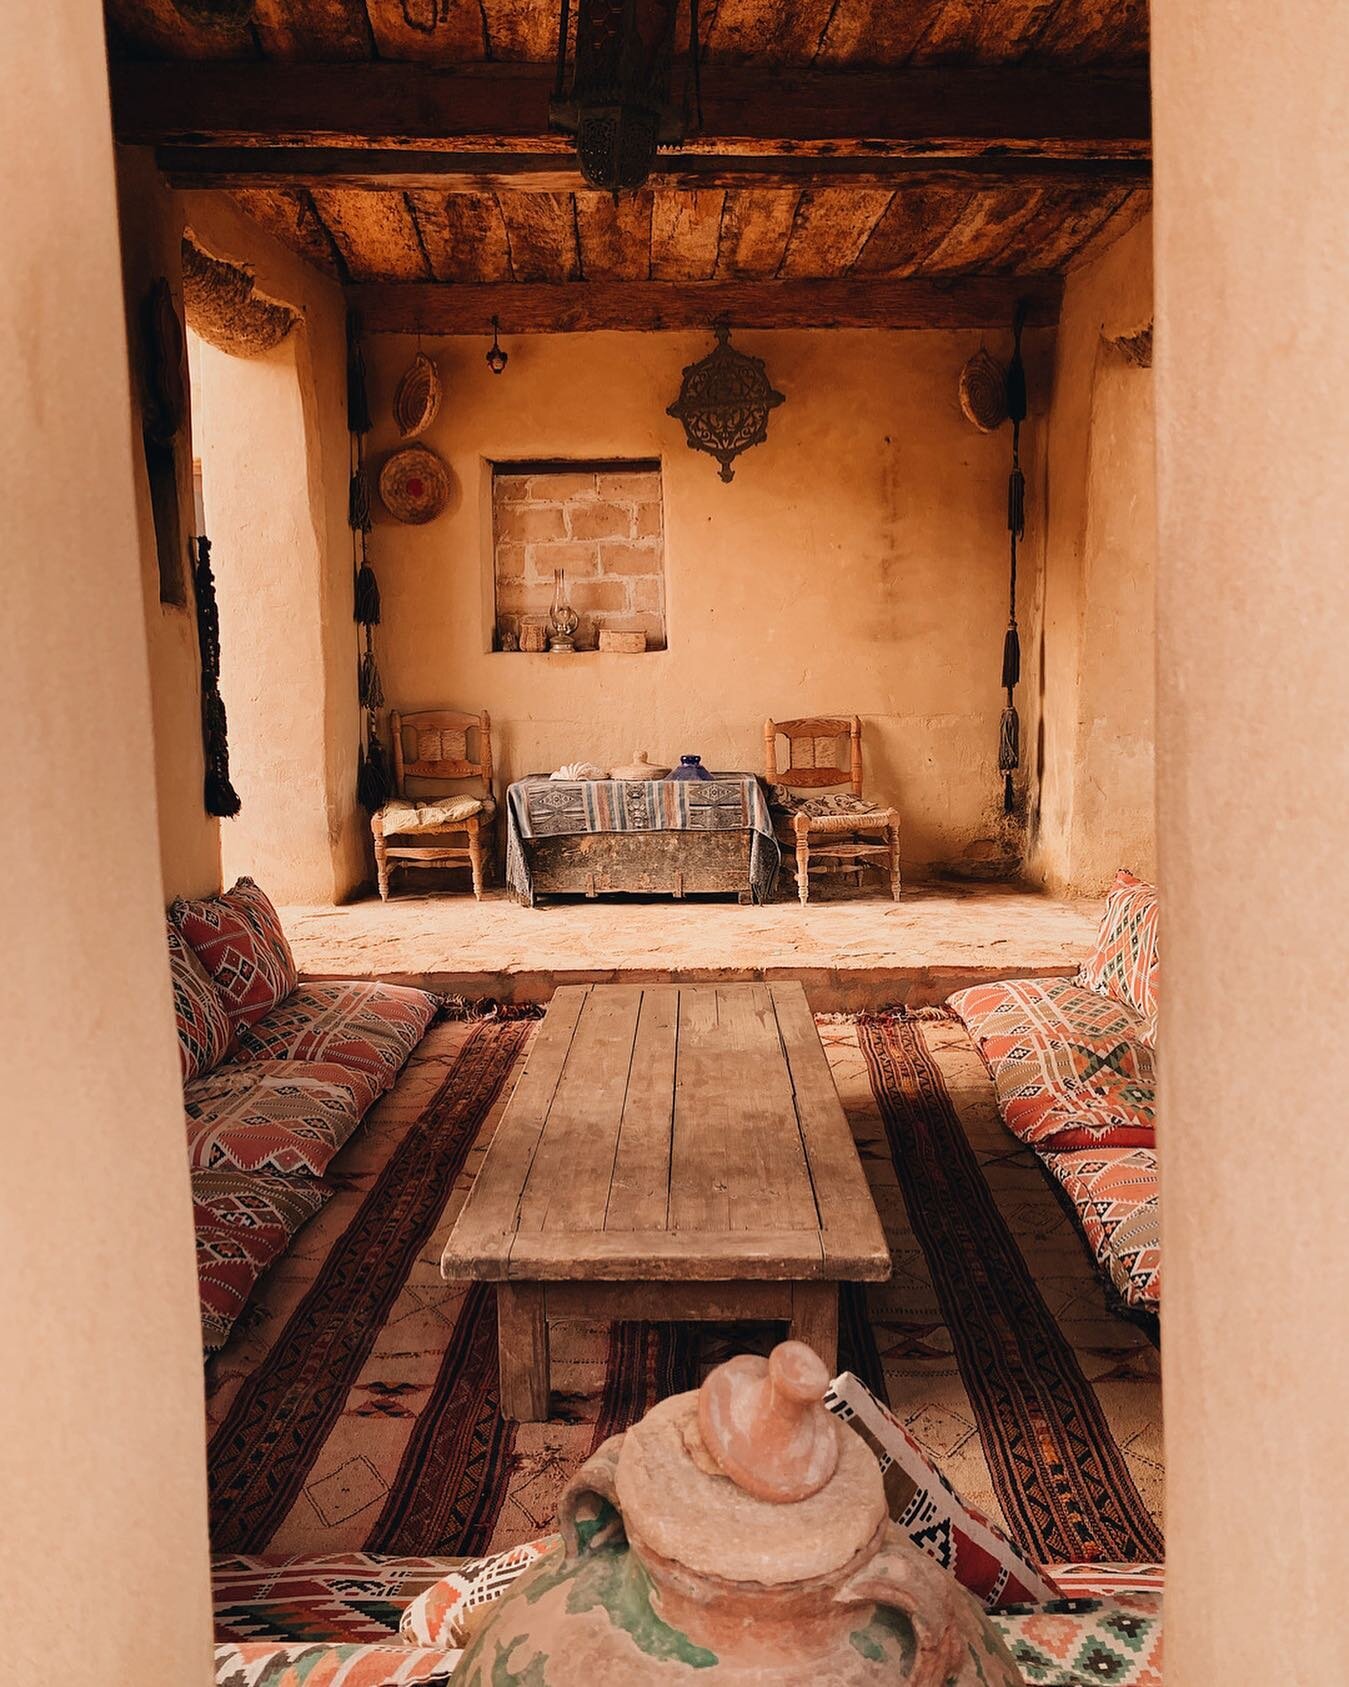 While in the Oasis of Siwa, we discovered the charming ecolodge village of @tazirysiwa where we enjoyed a most mesmerizing dinner under the stars. // photo by @thequietquest for @thecoverse.co #motherlandescapes #siwaoasis #experienceegypt
.
.
.
#tra